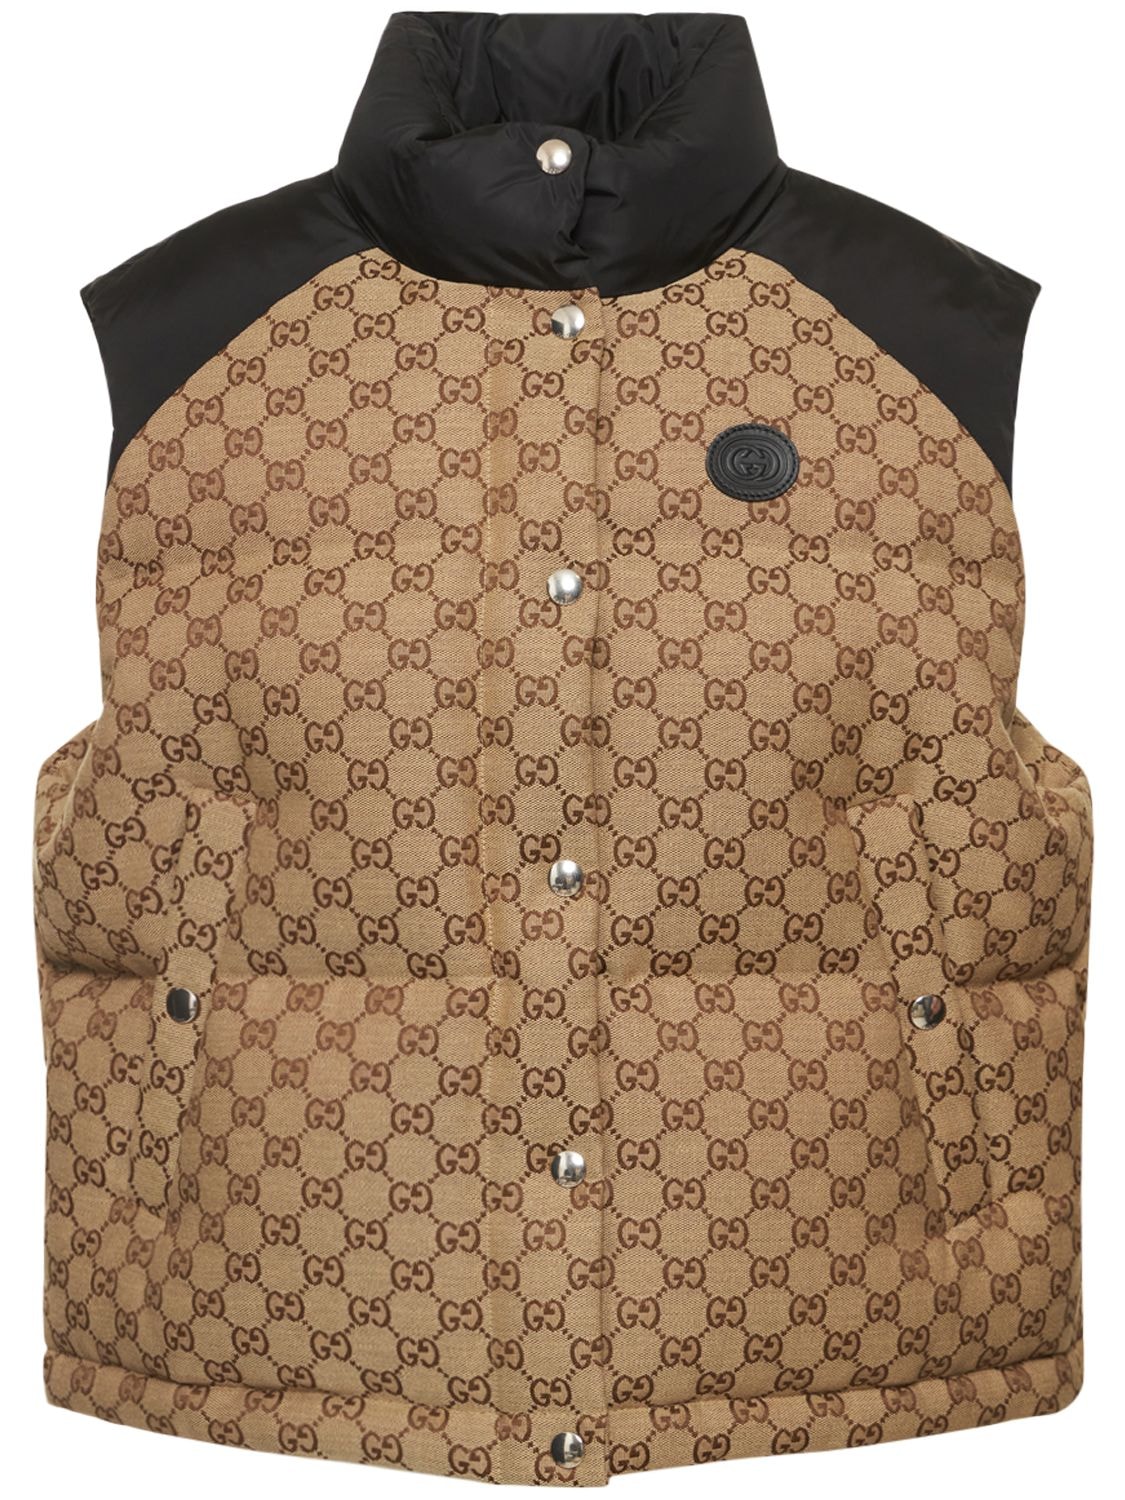 Cotton canvas and GG Supreme gilet in brown and beige